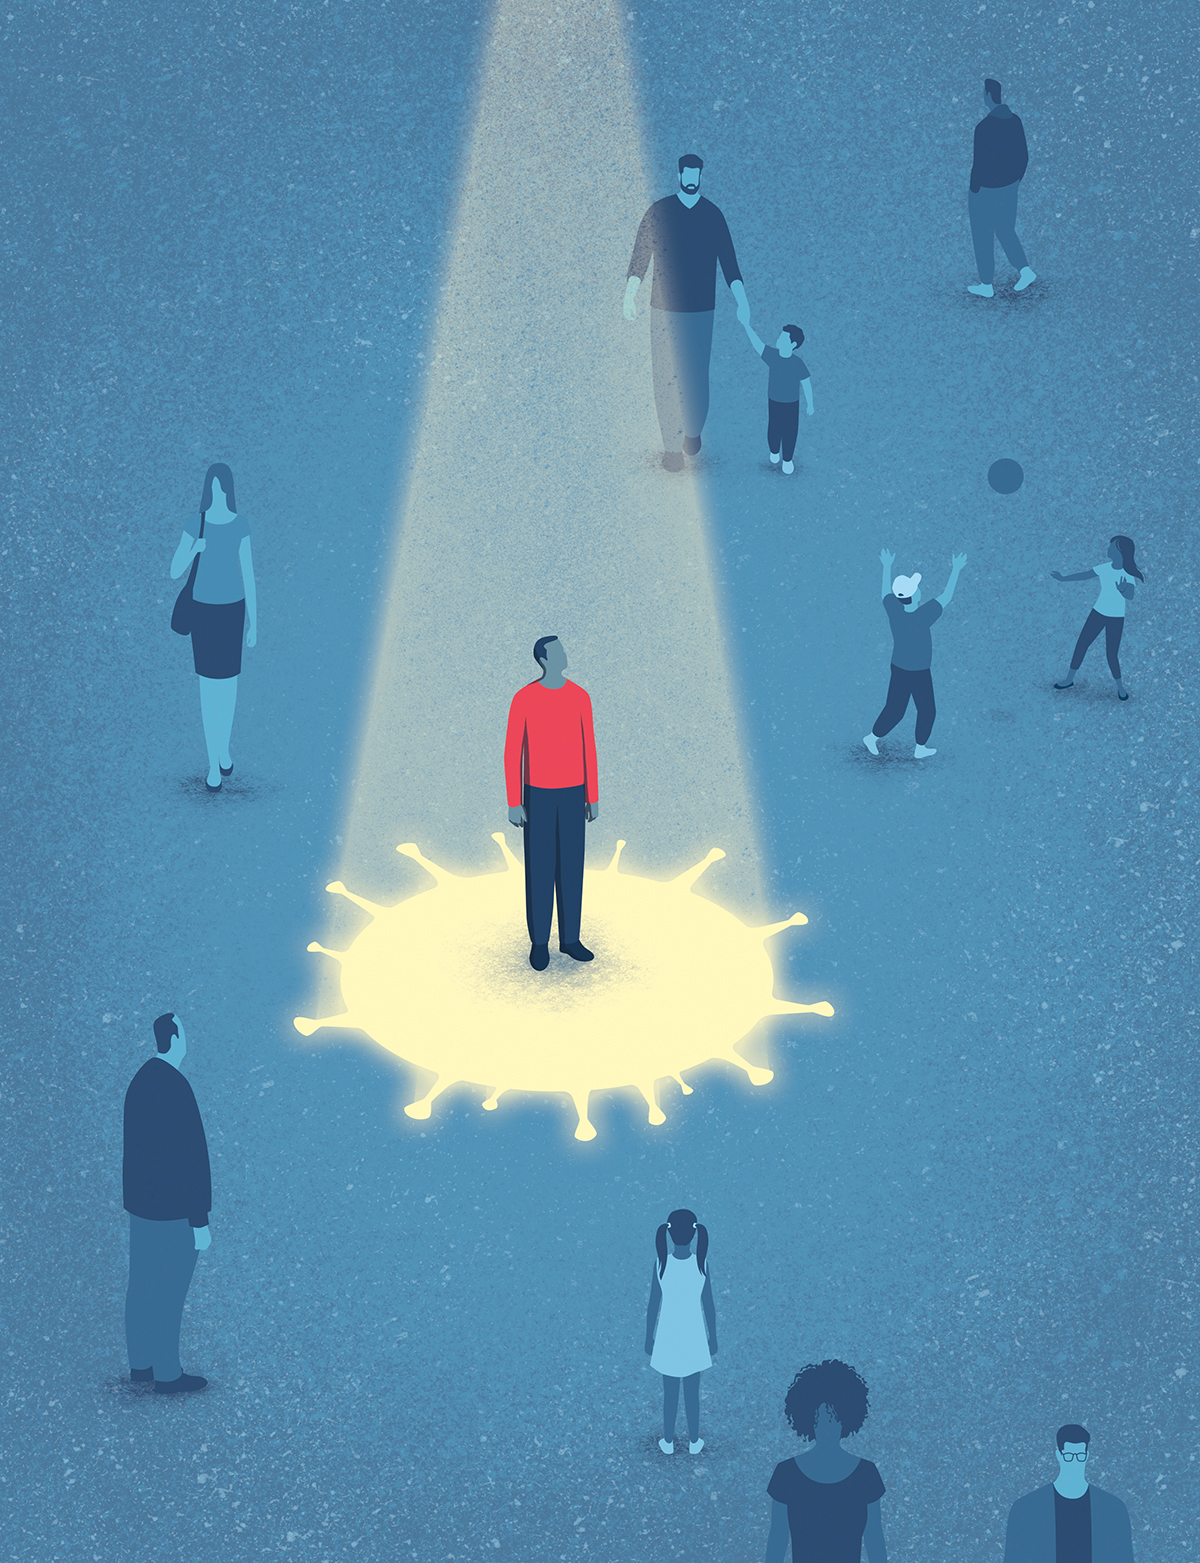 An illustration of a man standing in a COVID-19 shaped spotlight while others move about him in shadow.